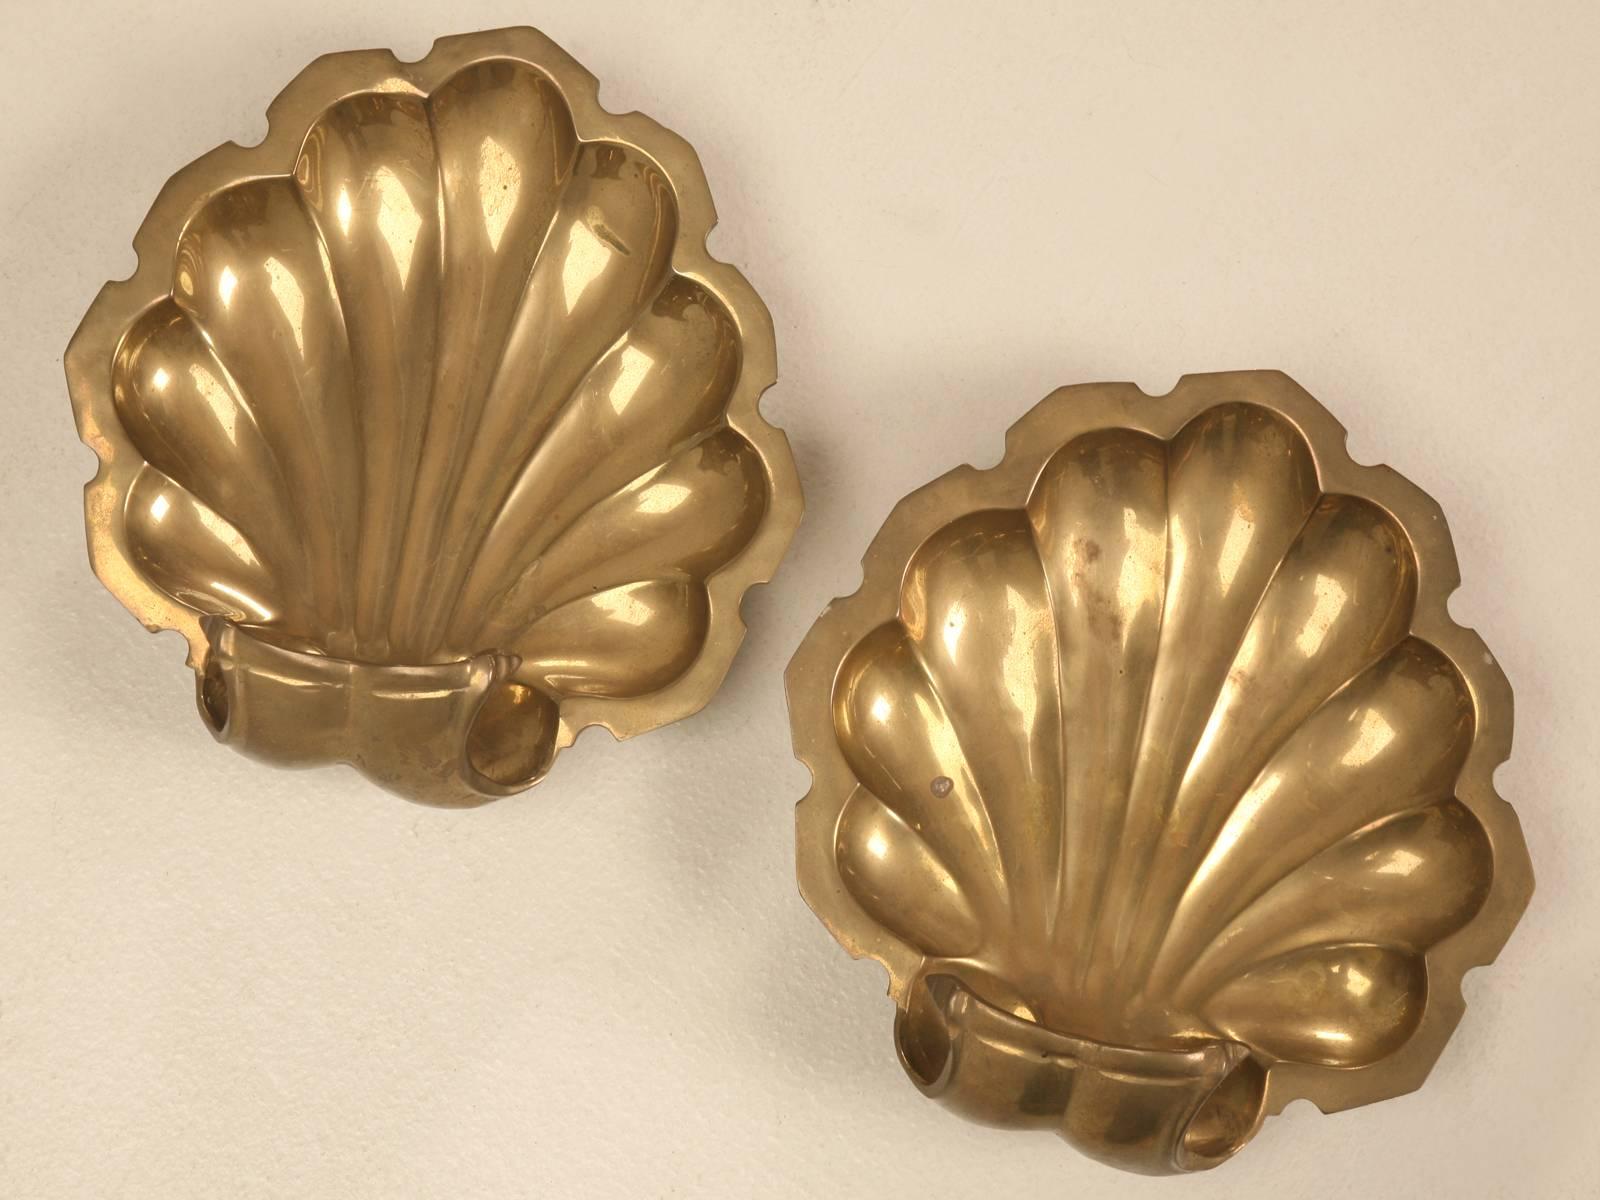 These brass clamshell dishes carry an excellent original patina. Ideal for use as his & her catchall dishes. The shells are heavy enough to make you think they could be bronze, but we’ll call them solid brass just to be on the safe side and